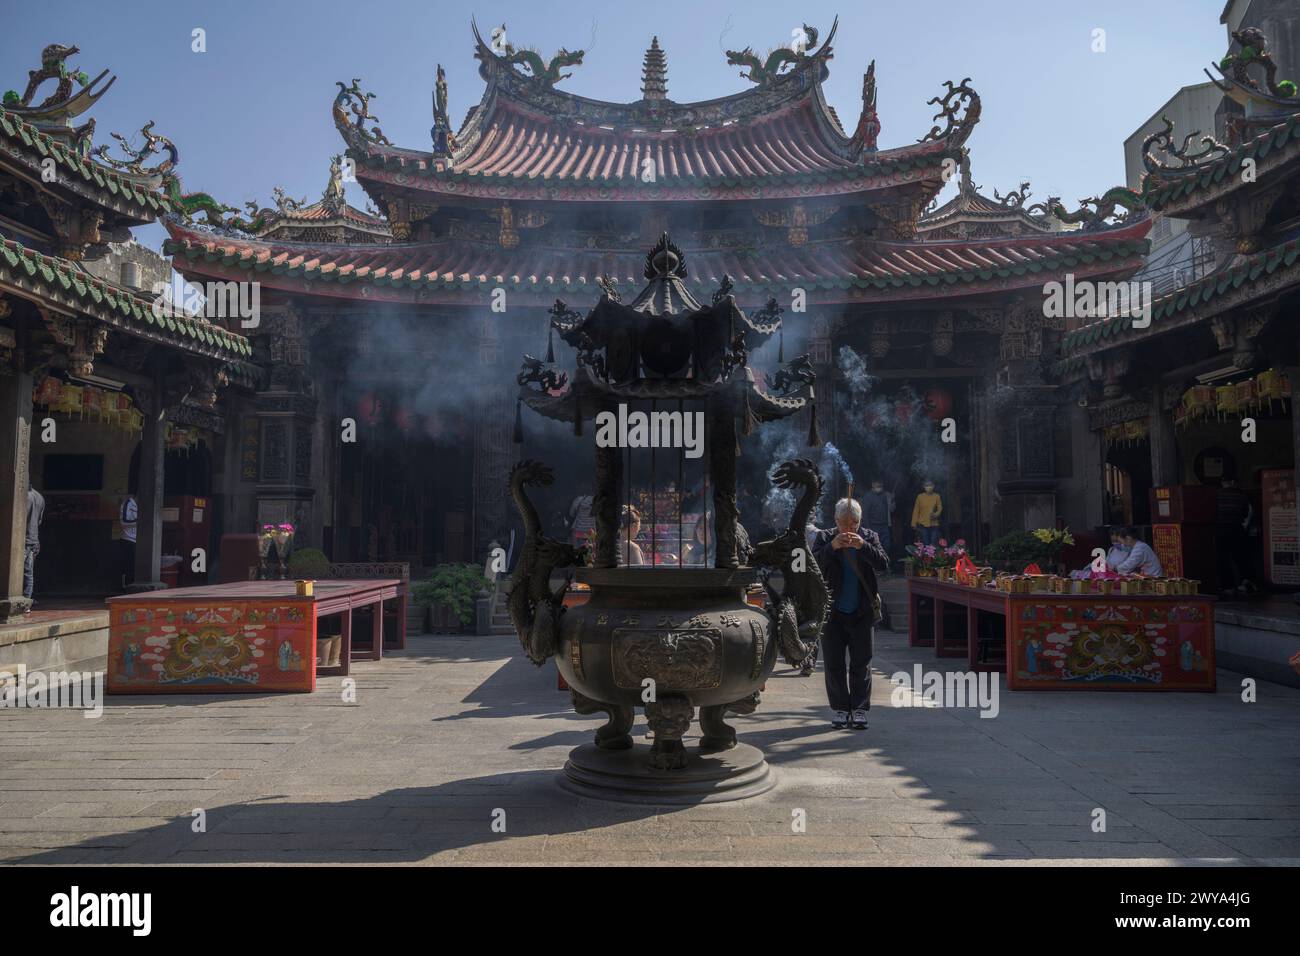 Tranquil scene with an incense burner in the foreground and intricate architecture of the Mazu temple Stock Photo